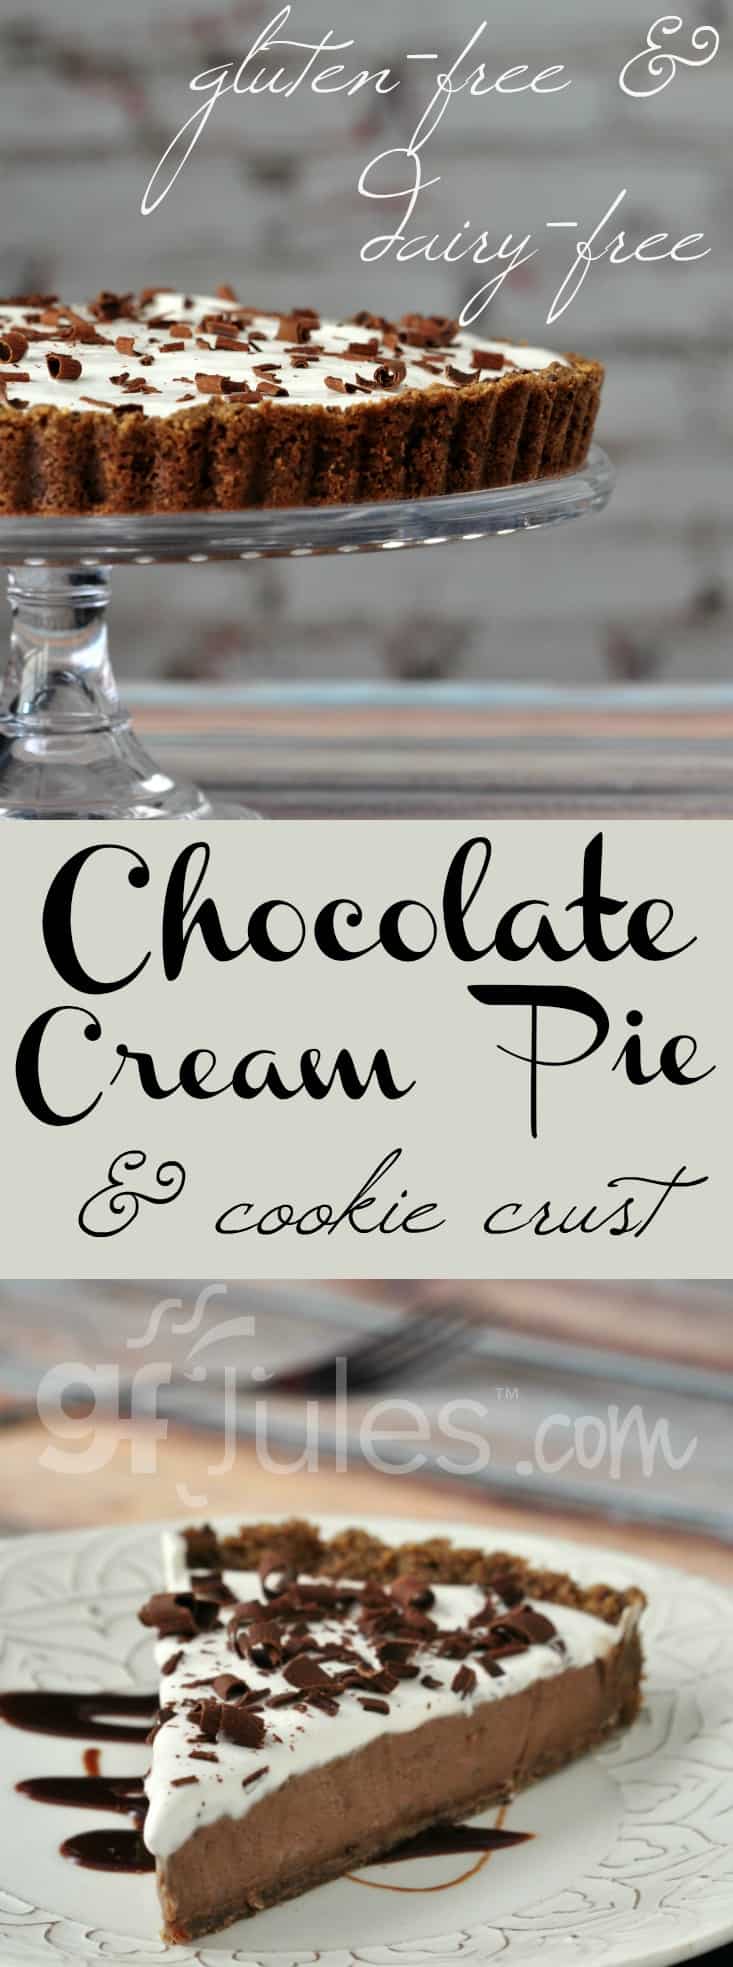 chocolate cream pie with cookie crust - gluten-free and dairy-free ... totally decadent! gfJules.com